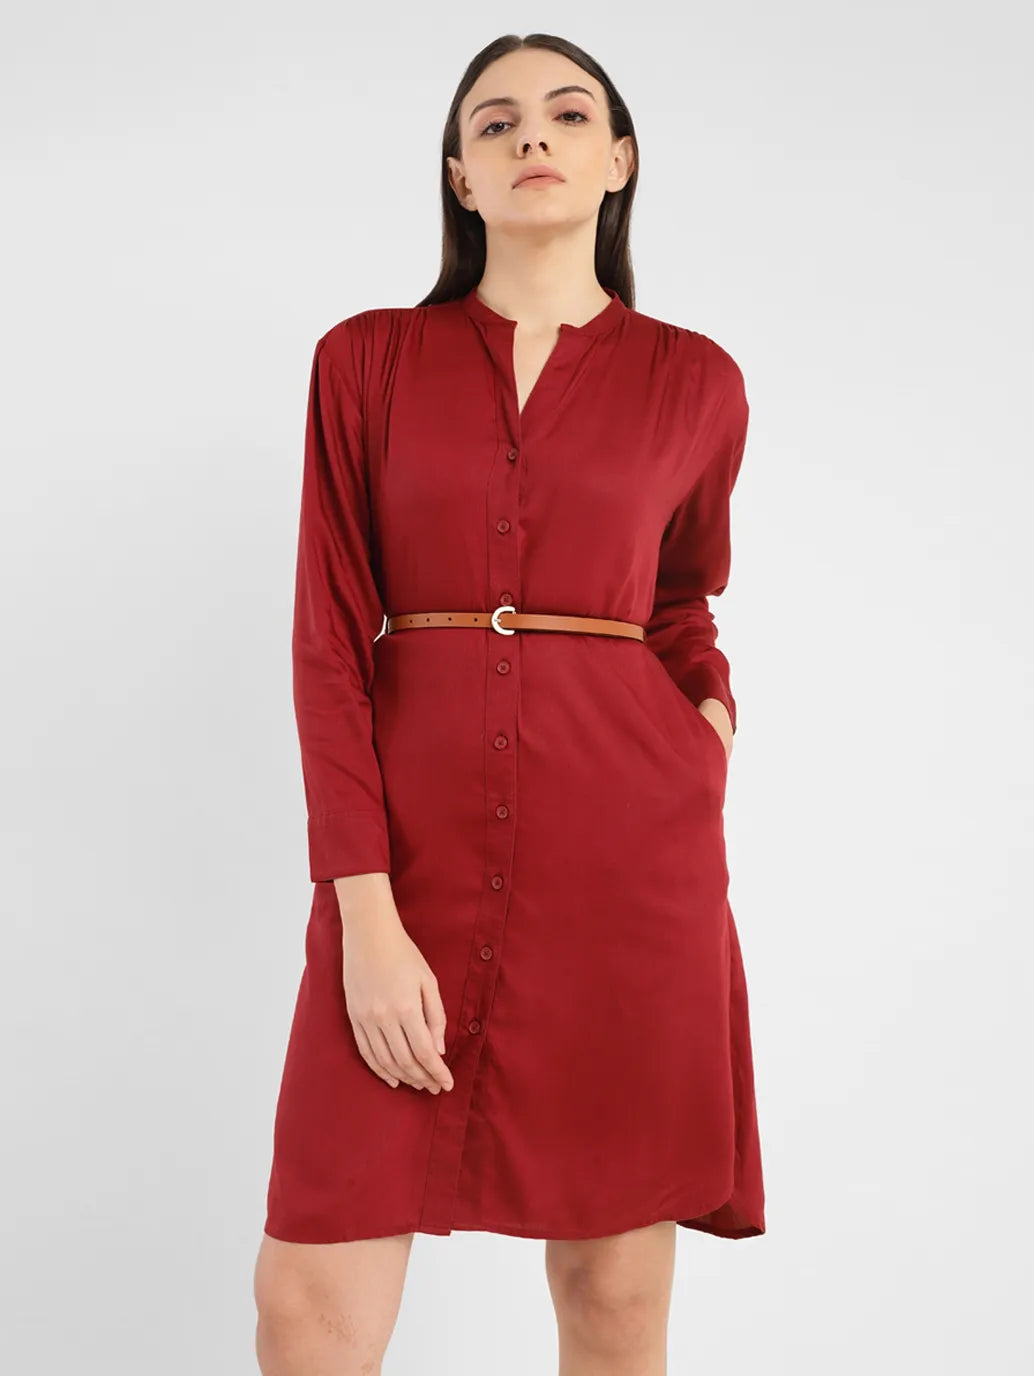 Women's Solid Red Band Neck Dress